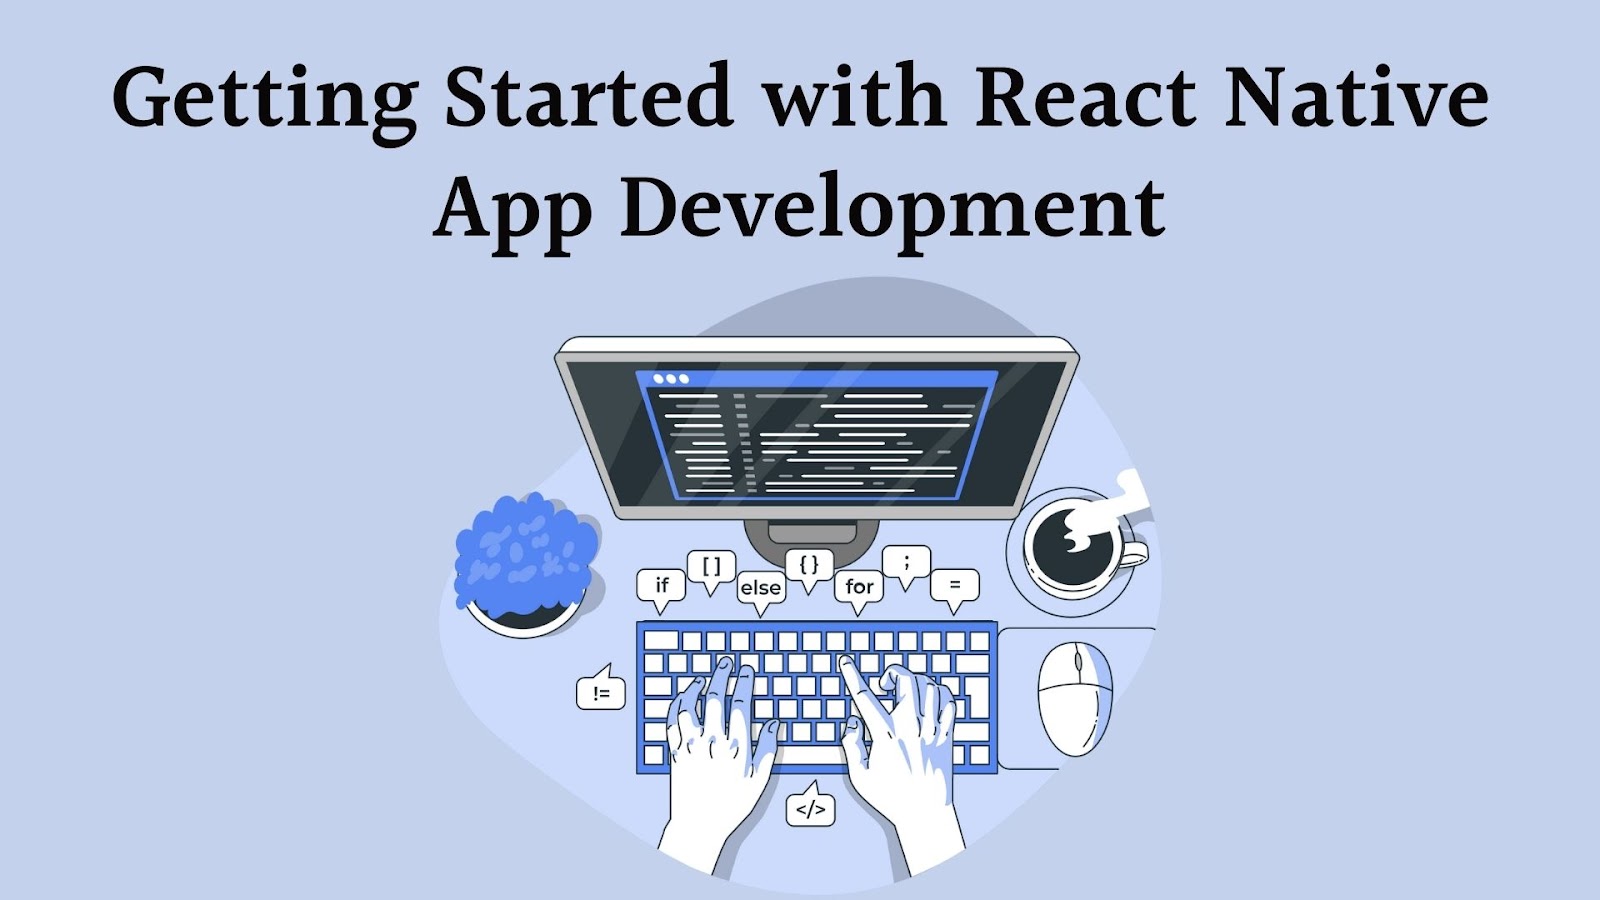 Getting Started with React Native App Development